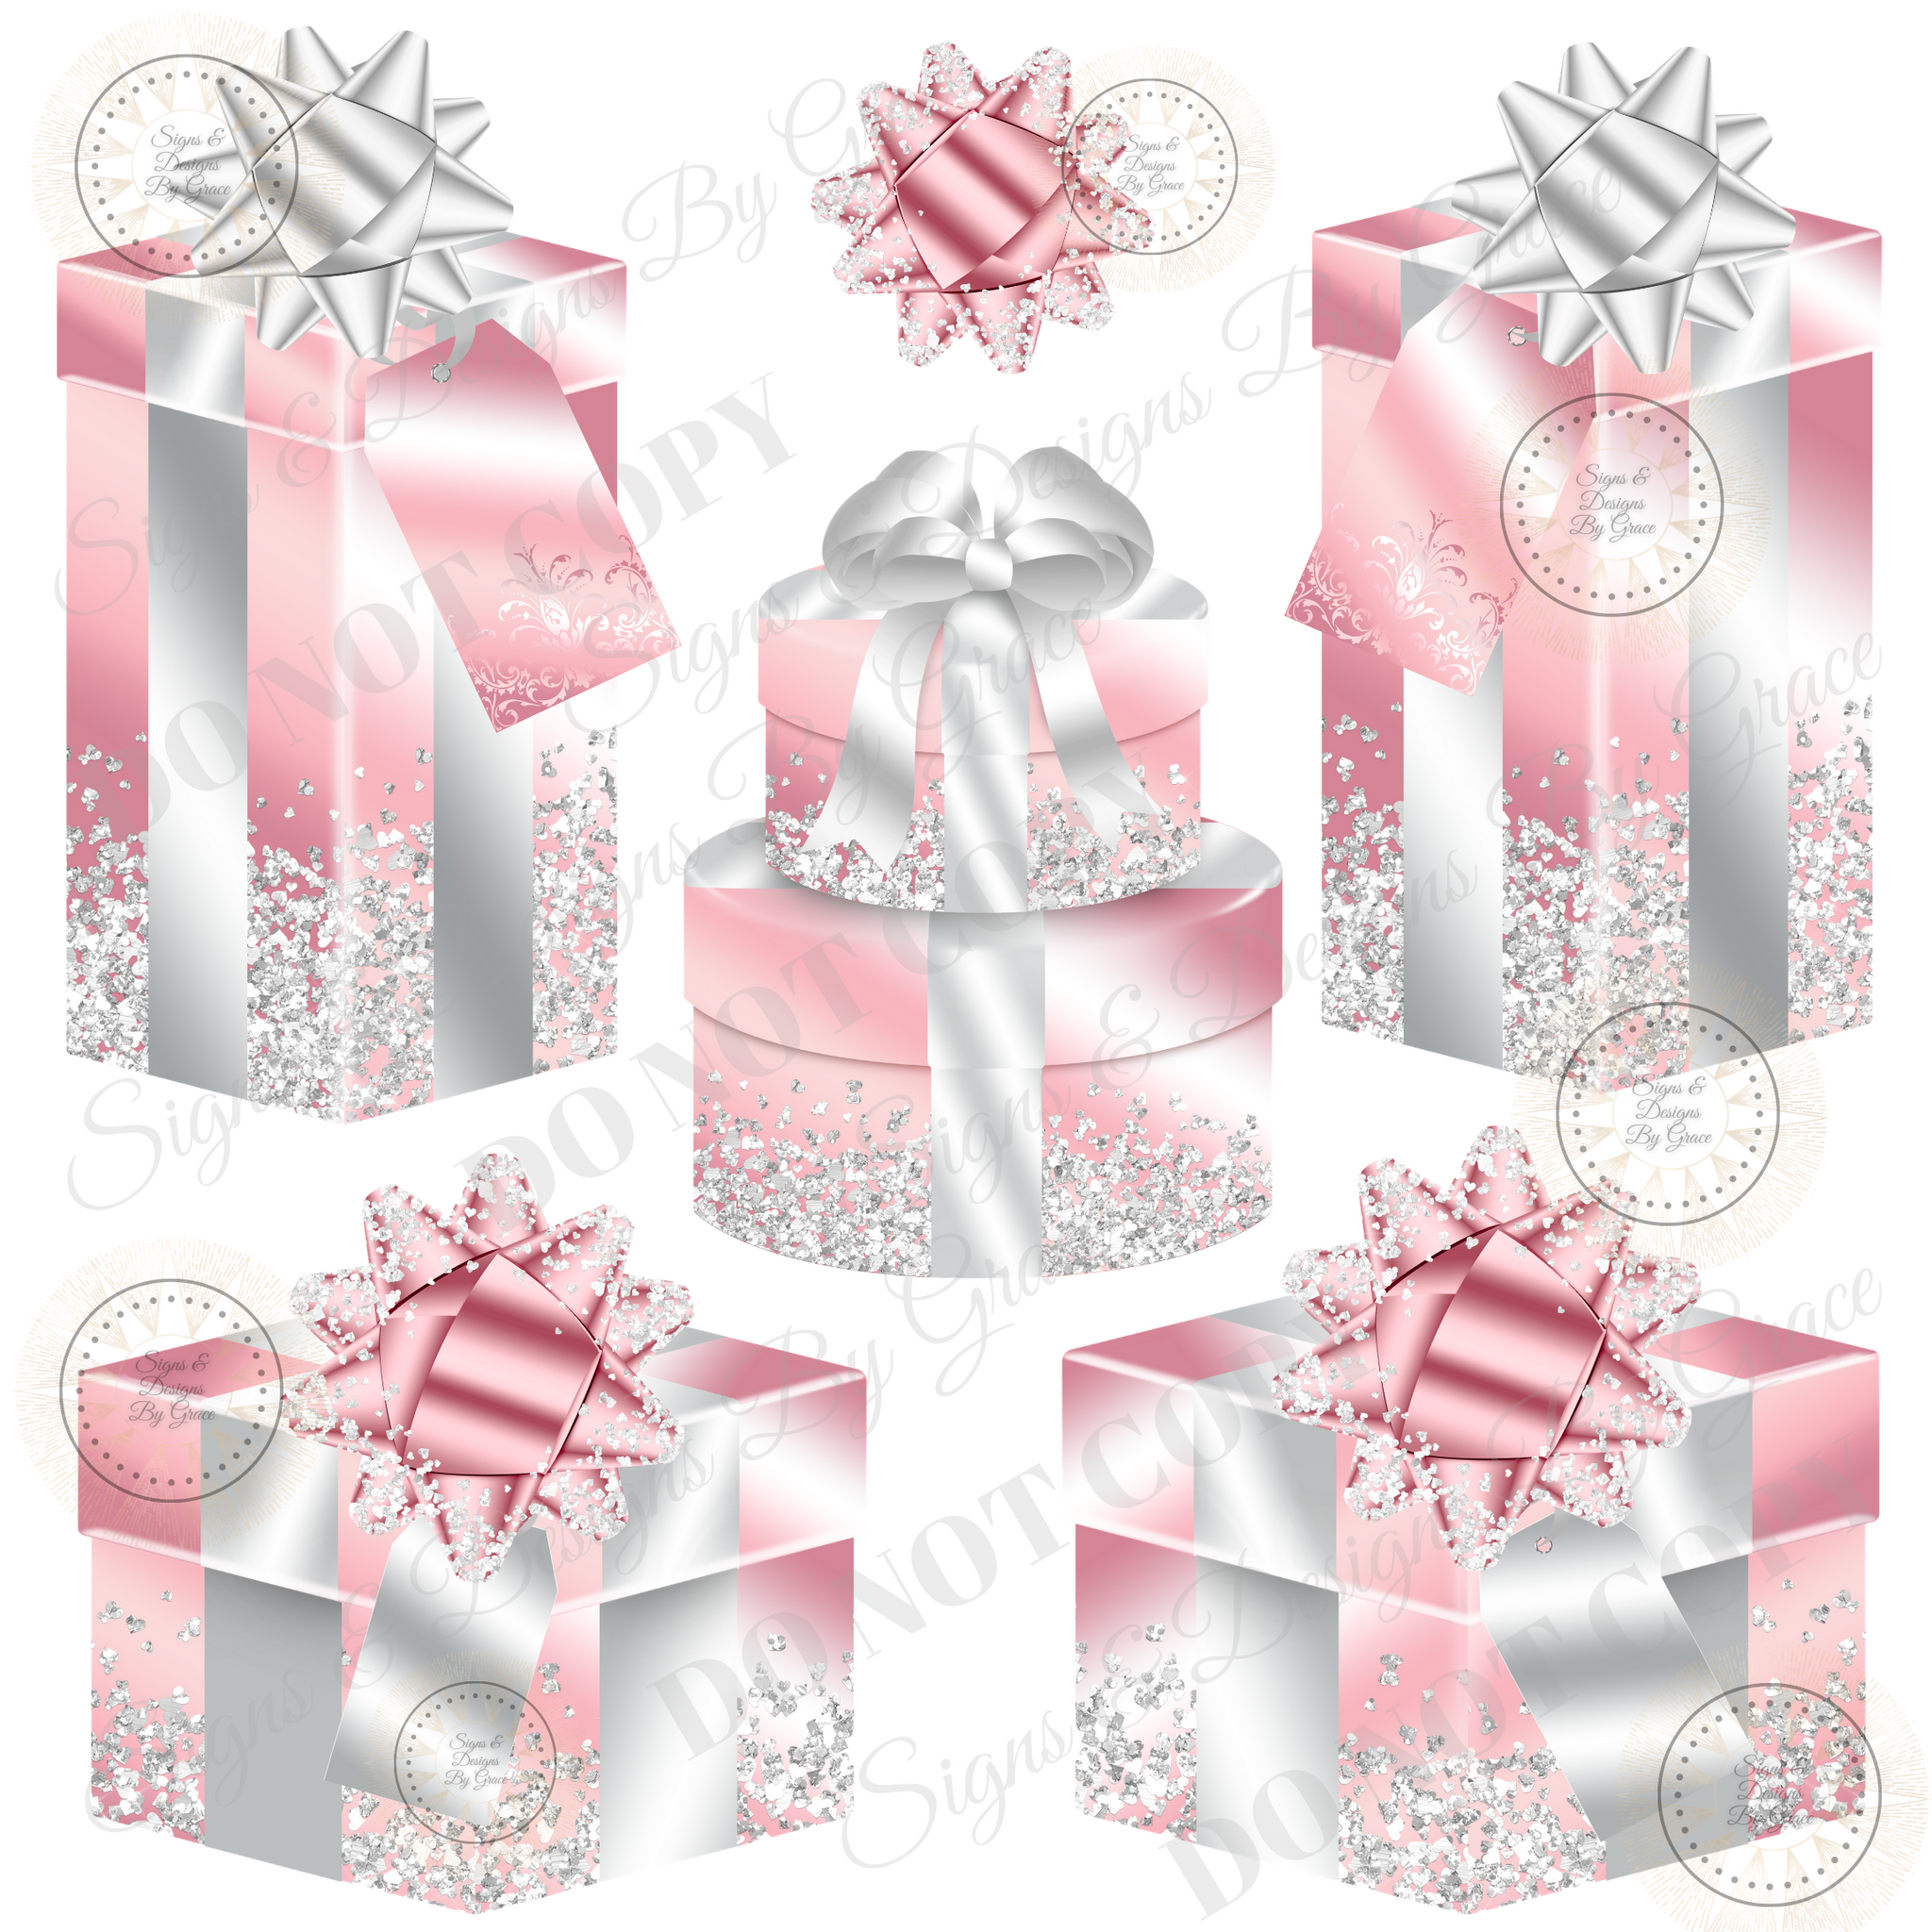 CUT pink silver gift boxes 703